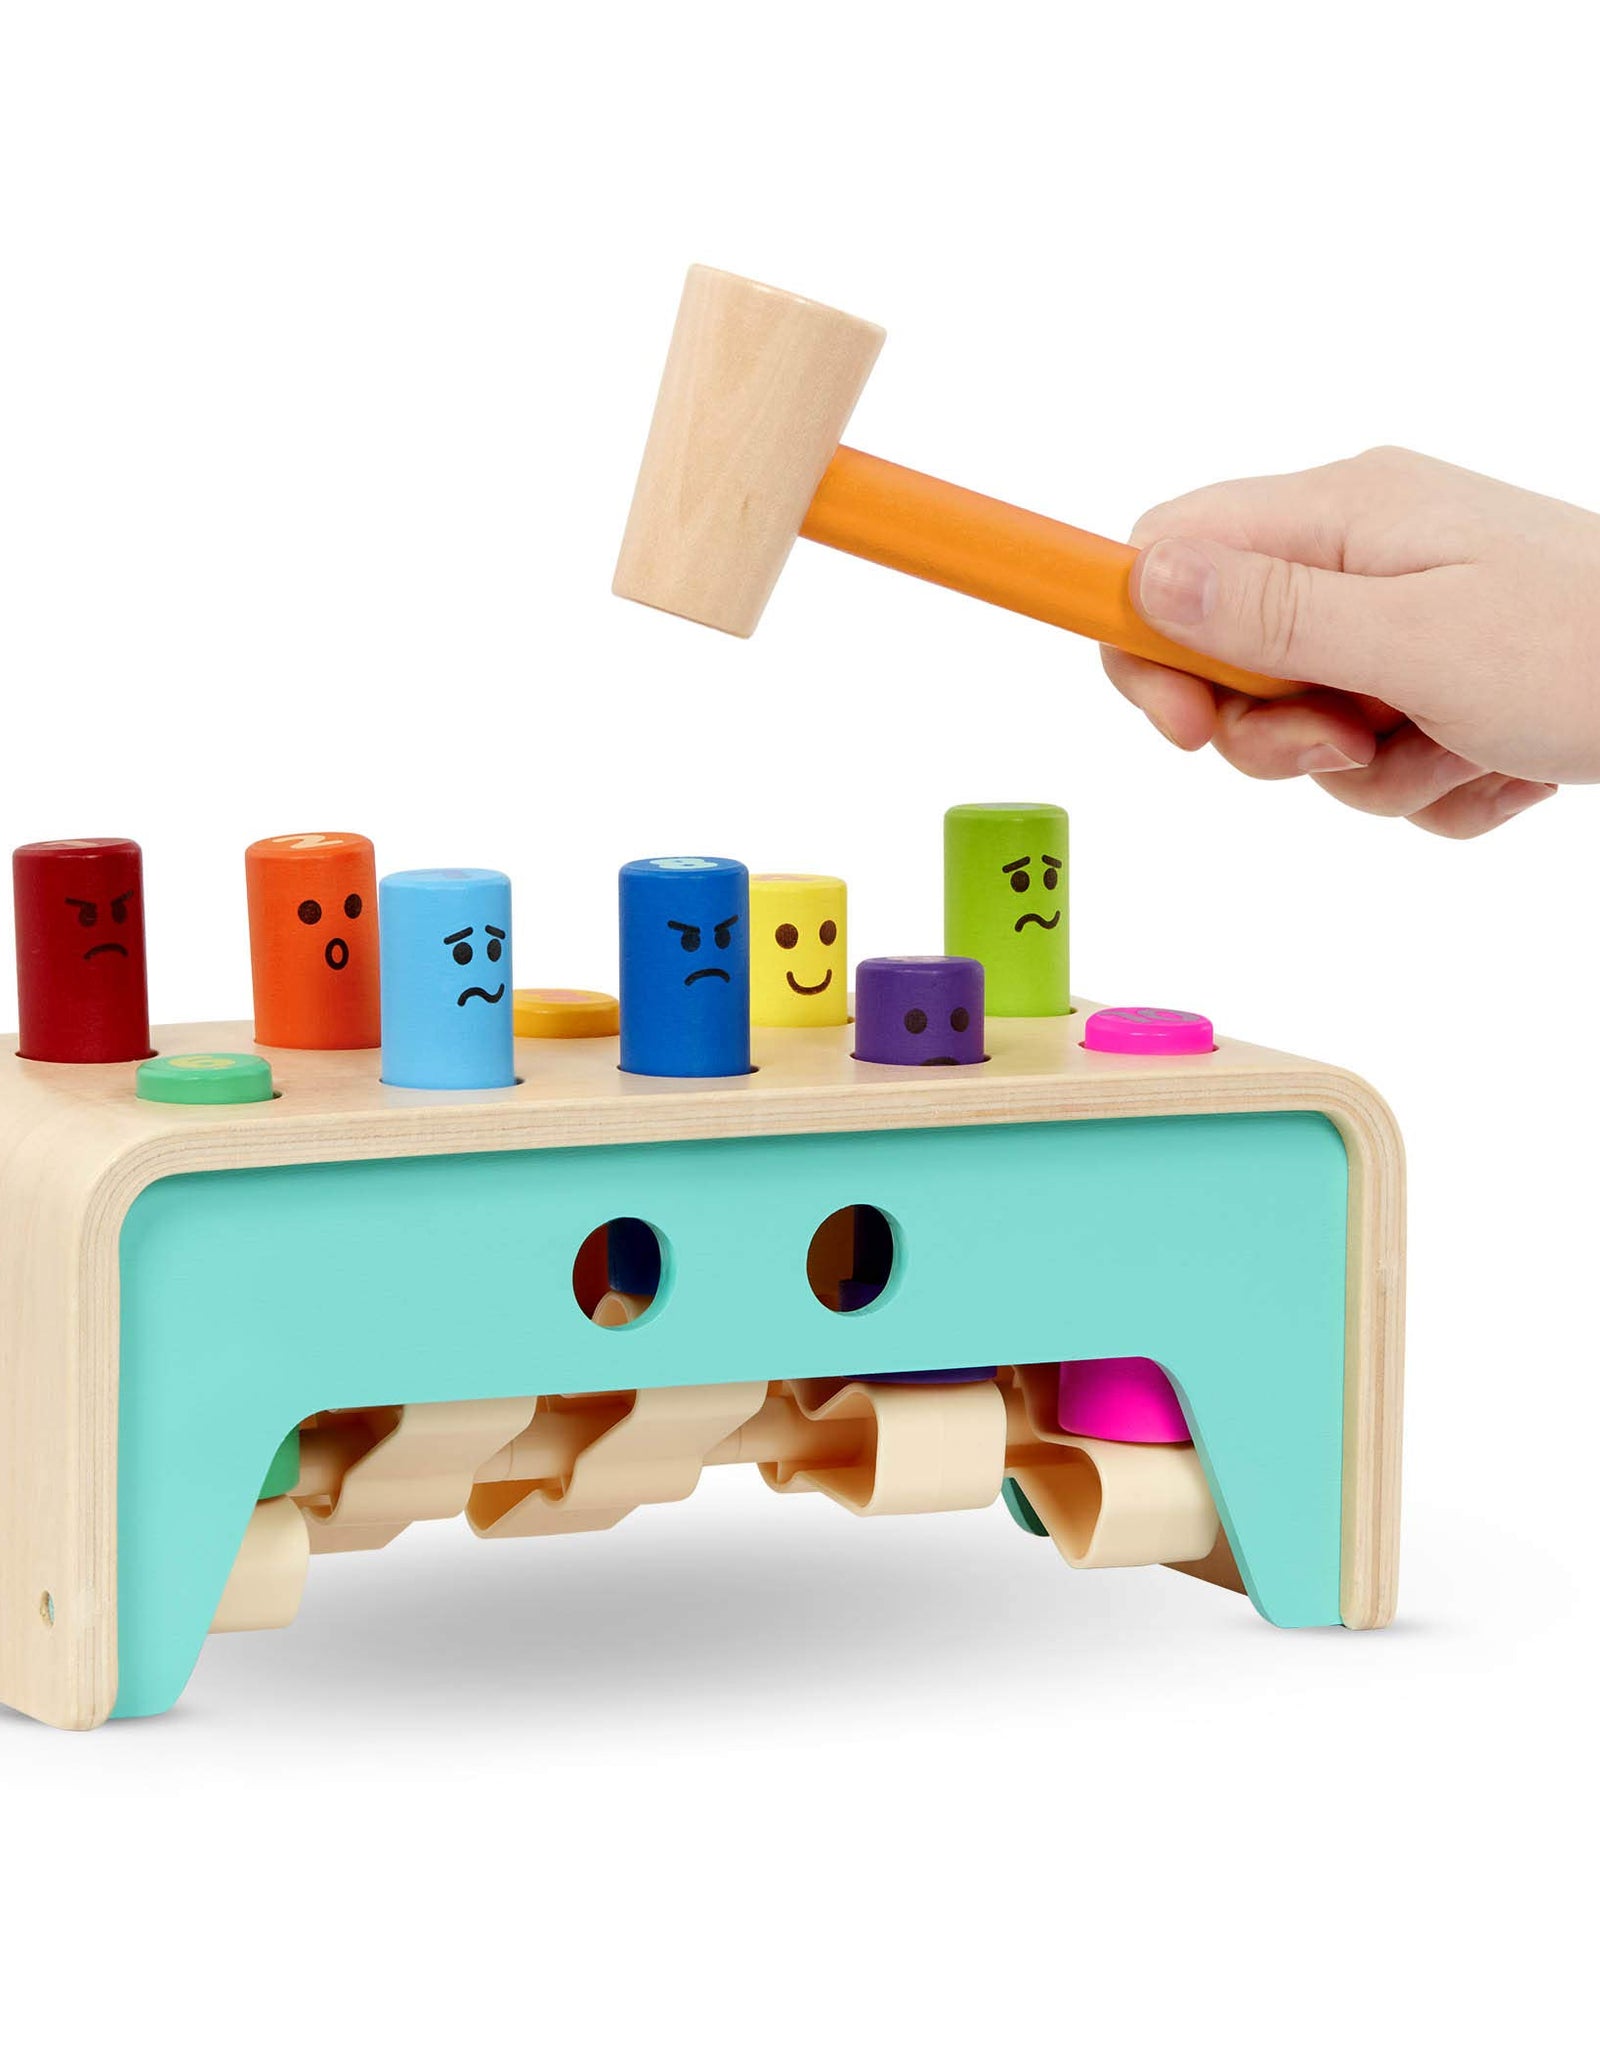 Battat – Wooden Hammer Toy for Kids, Toddlers – Pounding Bench with Pegs and Mallet –Colorful Developmental Toy – Pound & Count Bench – 1 Year +